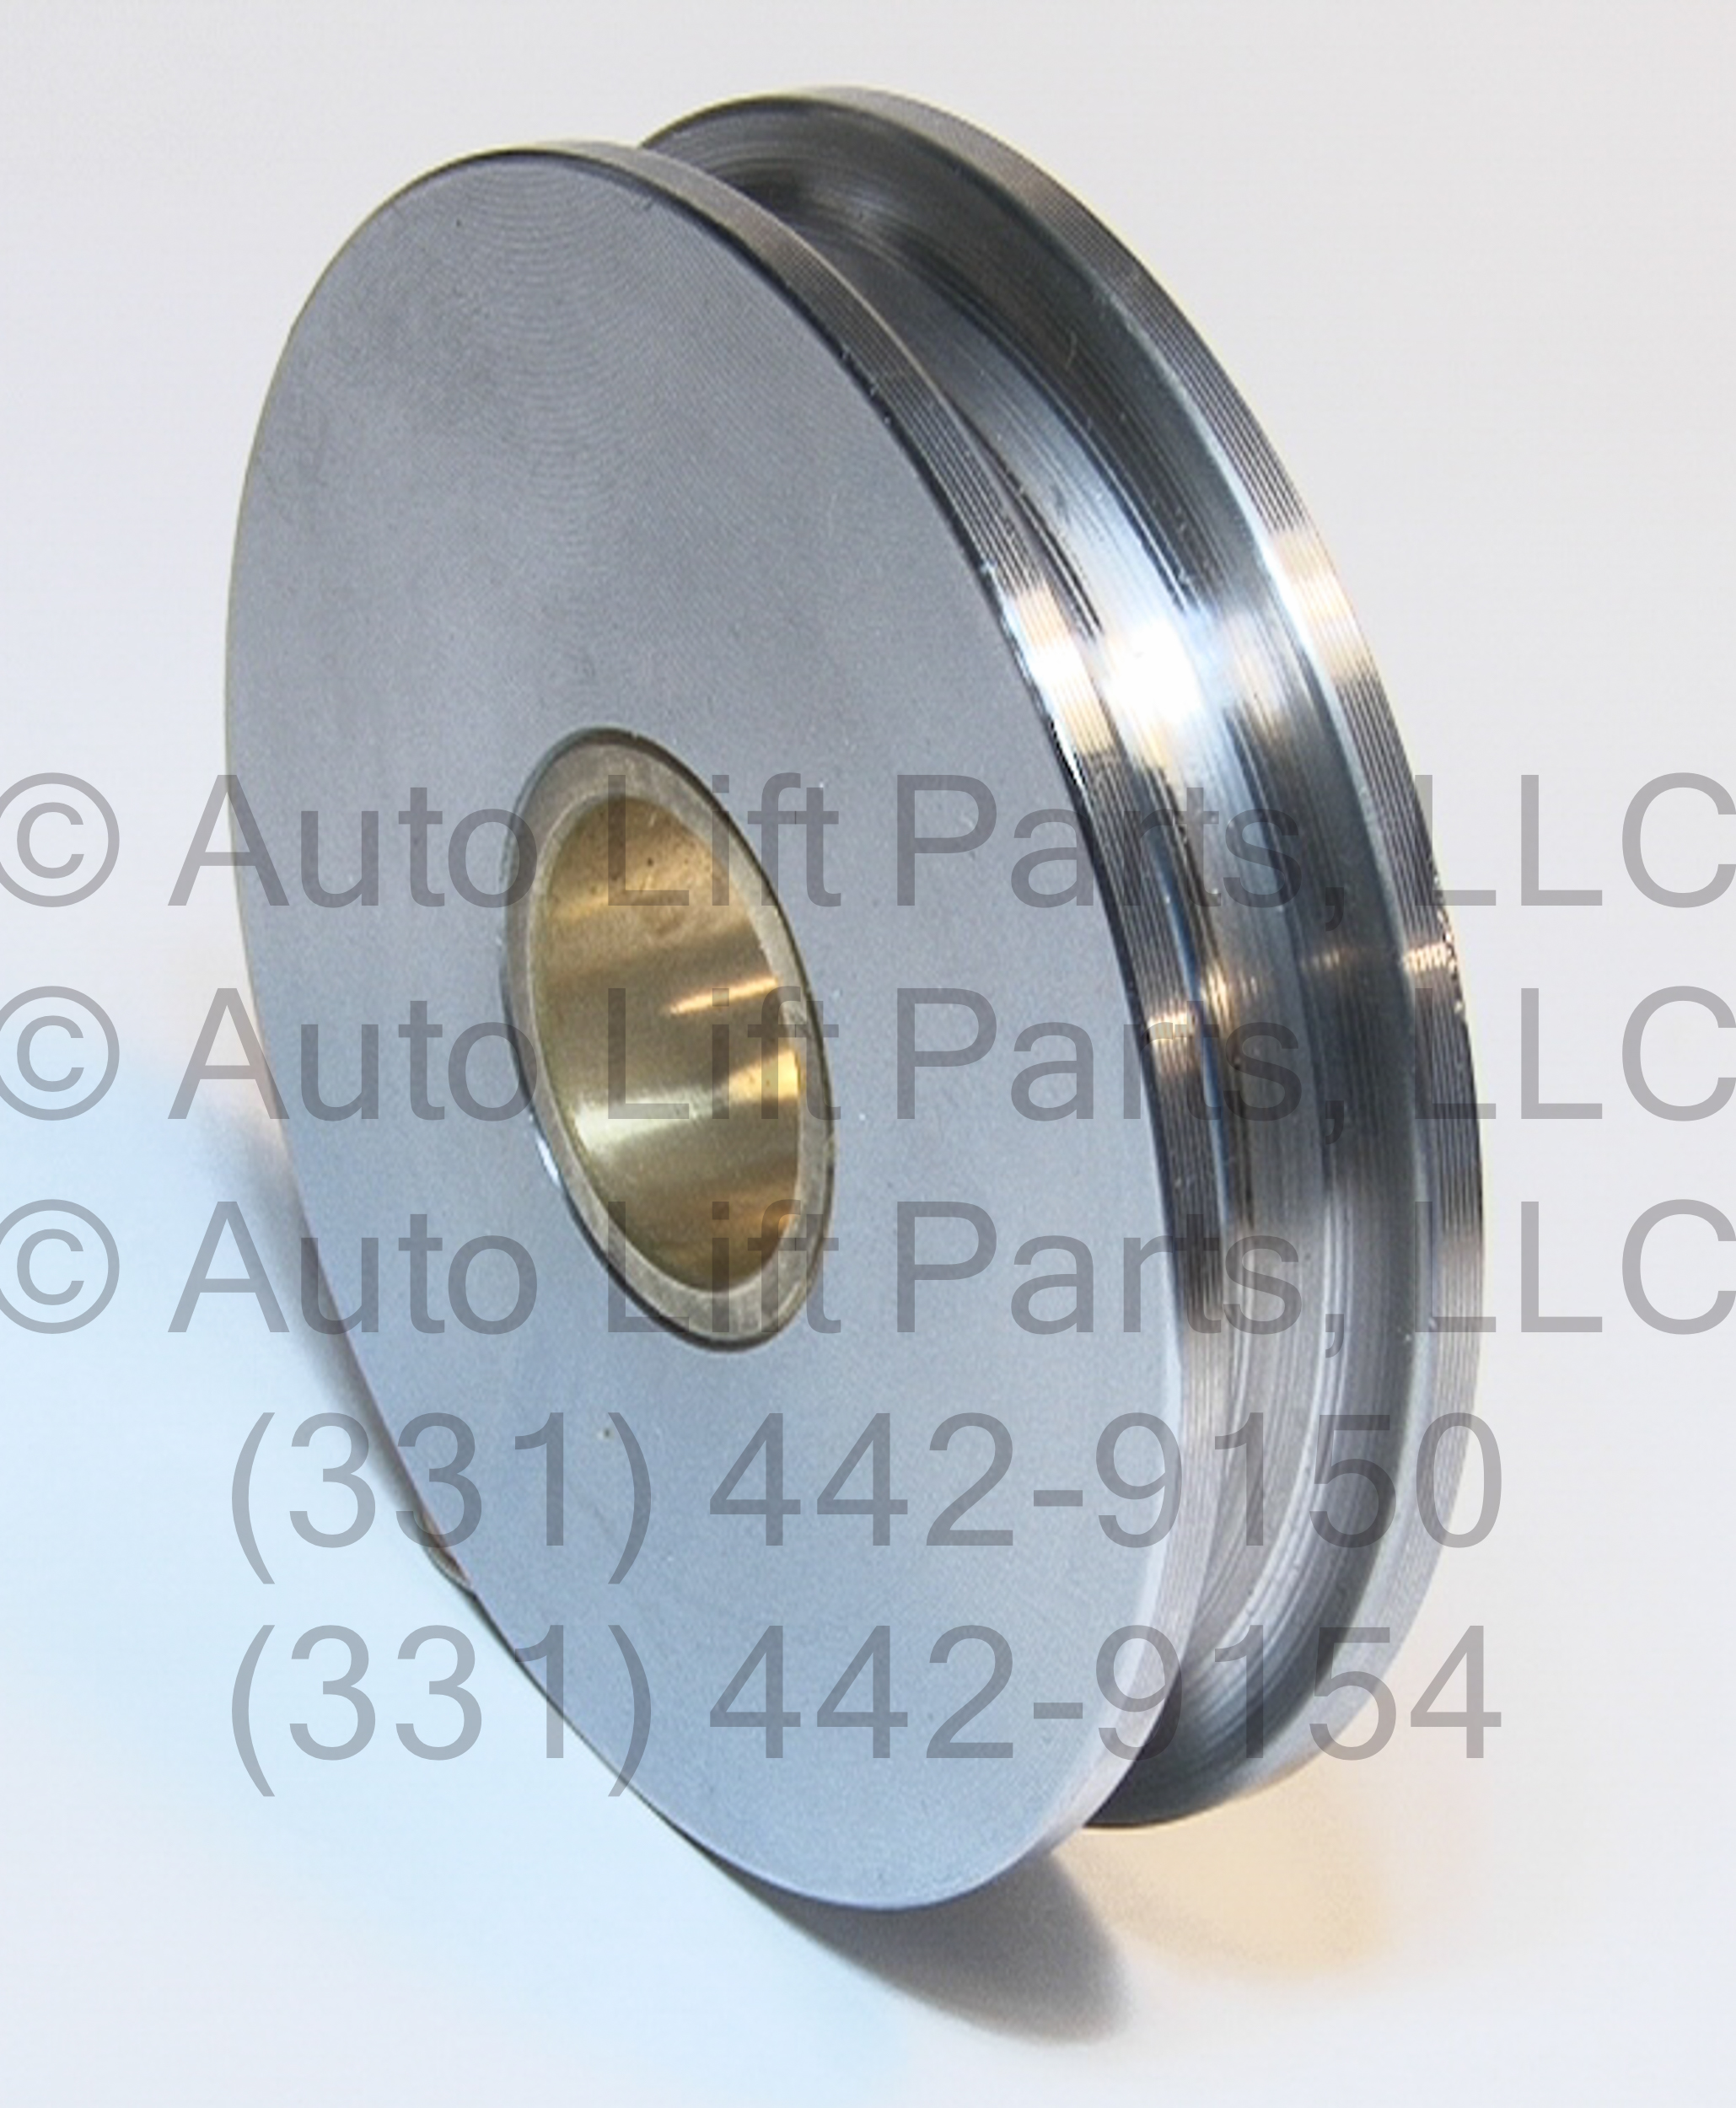 Cable Pulley for Industrial Cable Sheave Marine Use or Auto Lift 3/8" Cables 